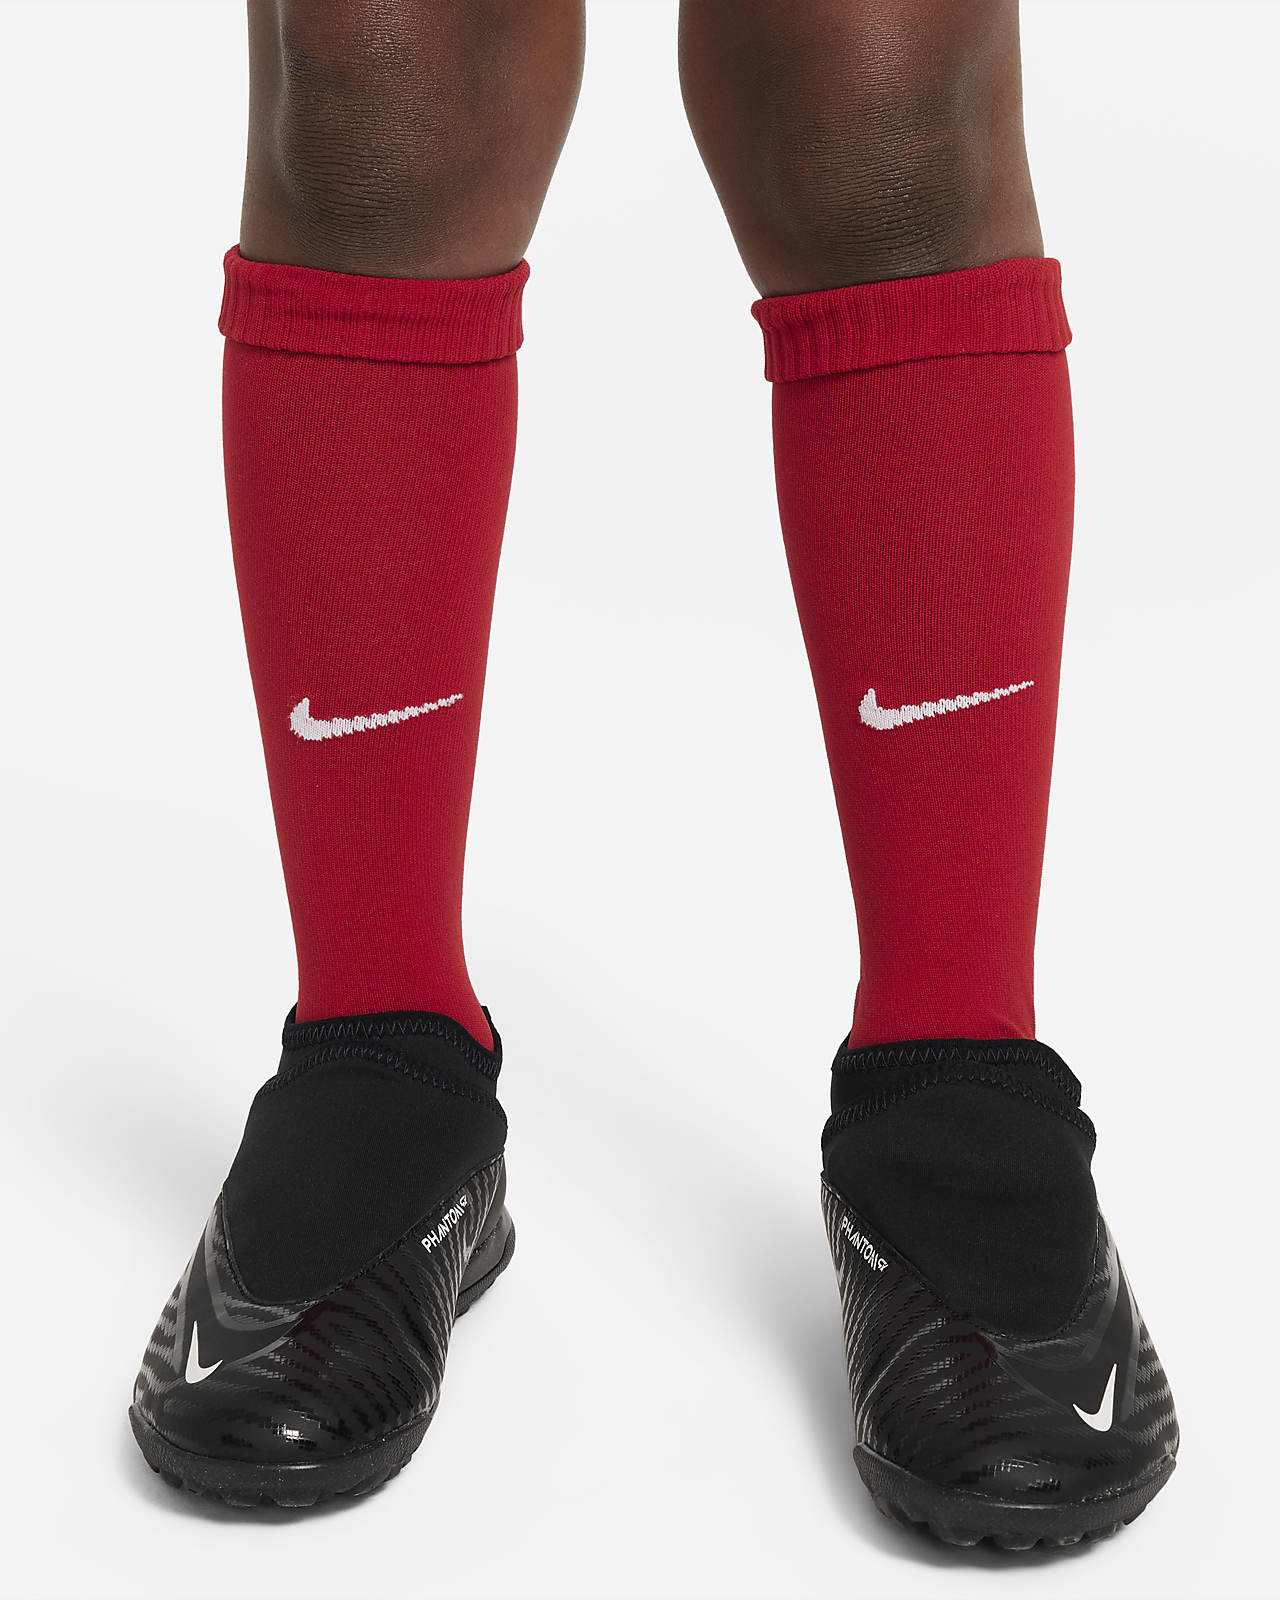 Red Nike Liverpool FC 2023/24 Home Shirt